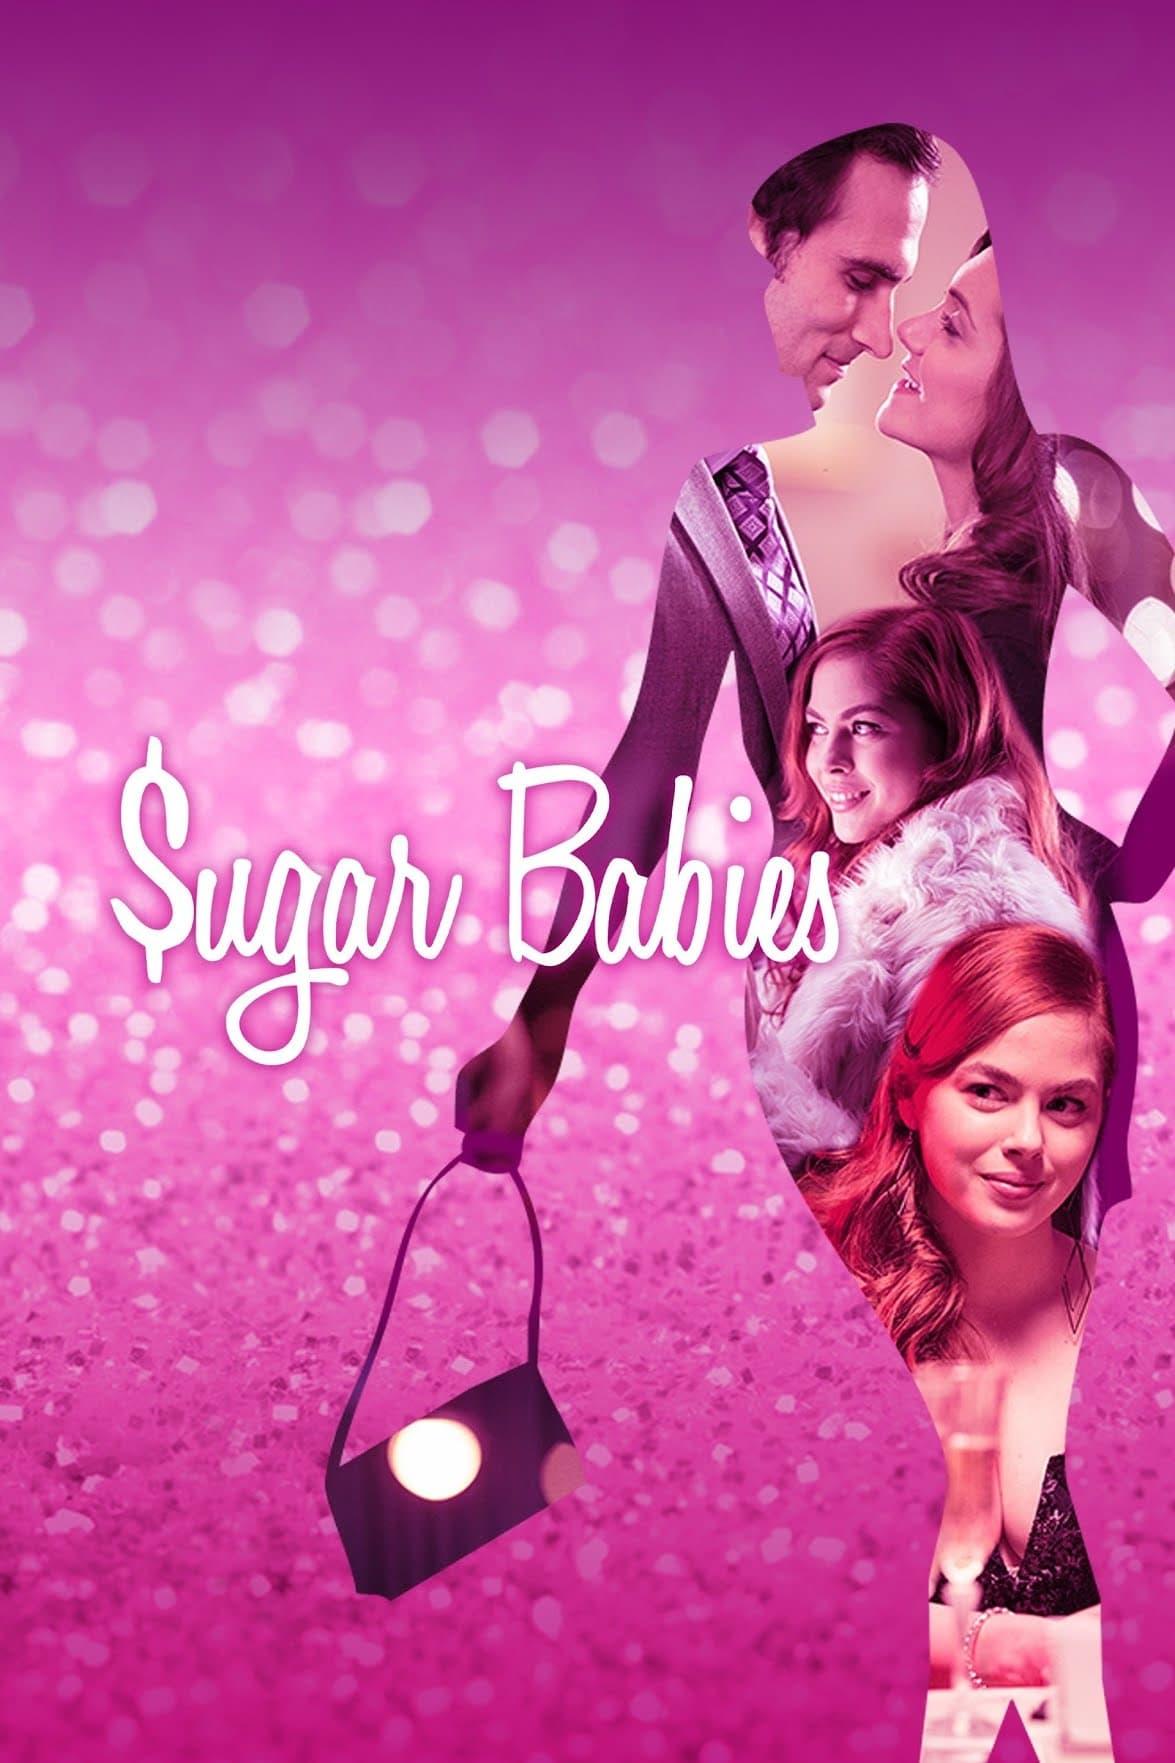 Sugarbabes poster